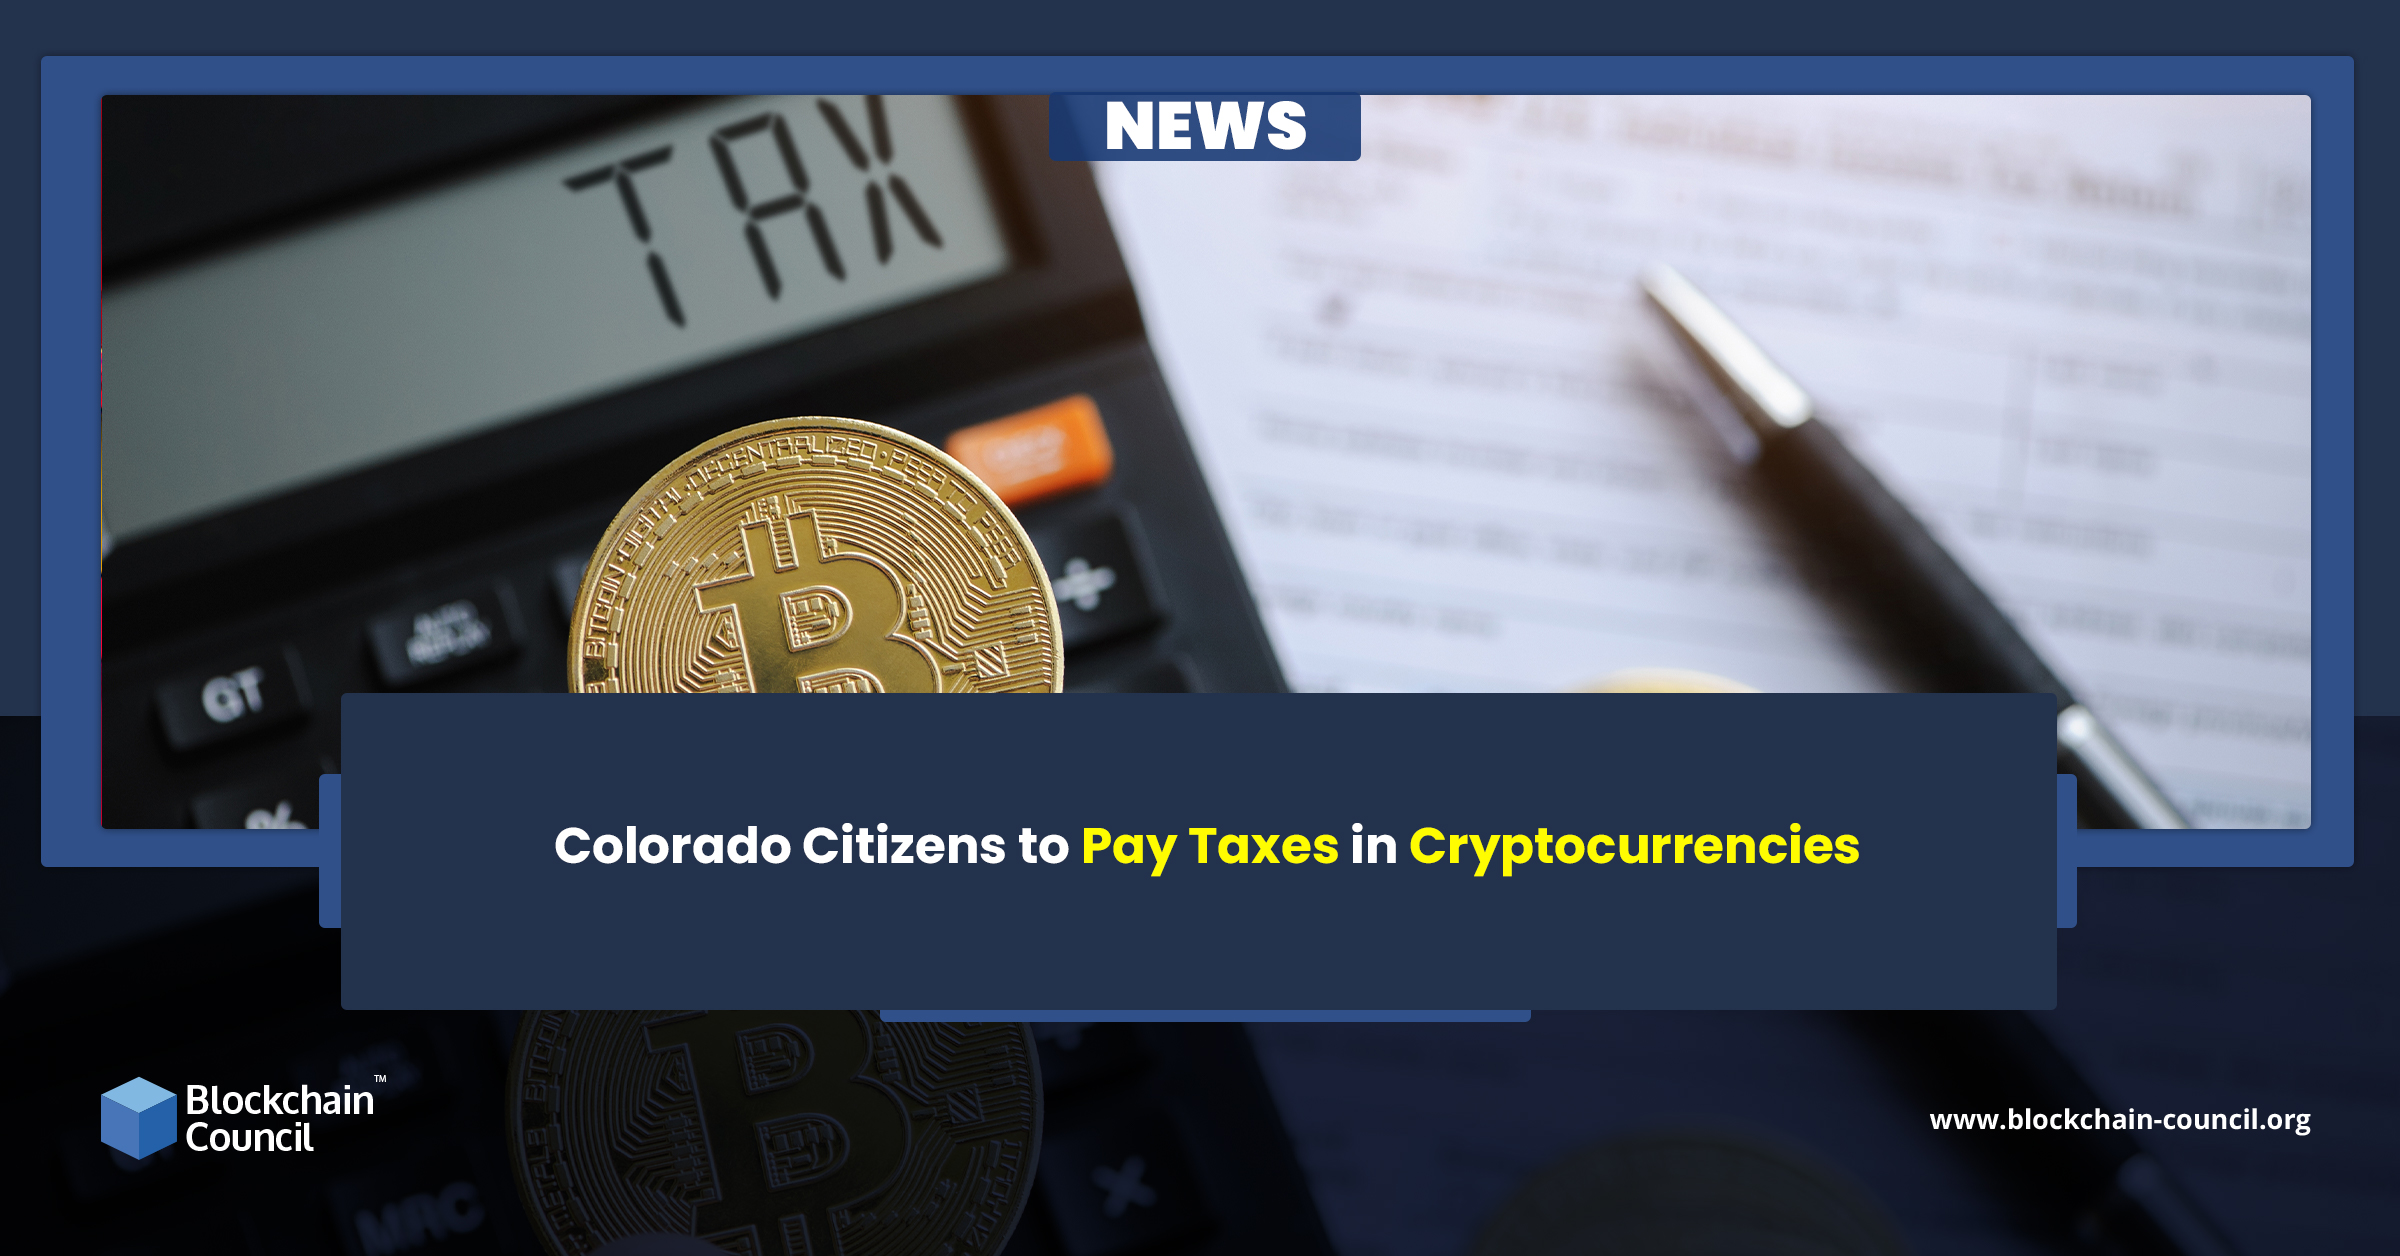 Colorado Citizens to Pay Taxes in Cryptocurrencies